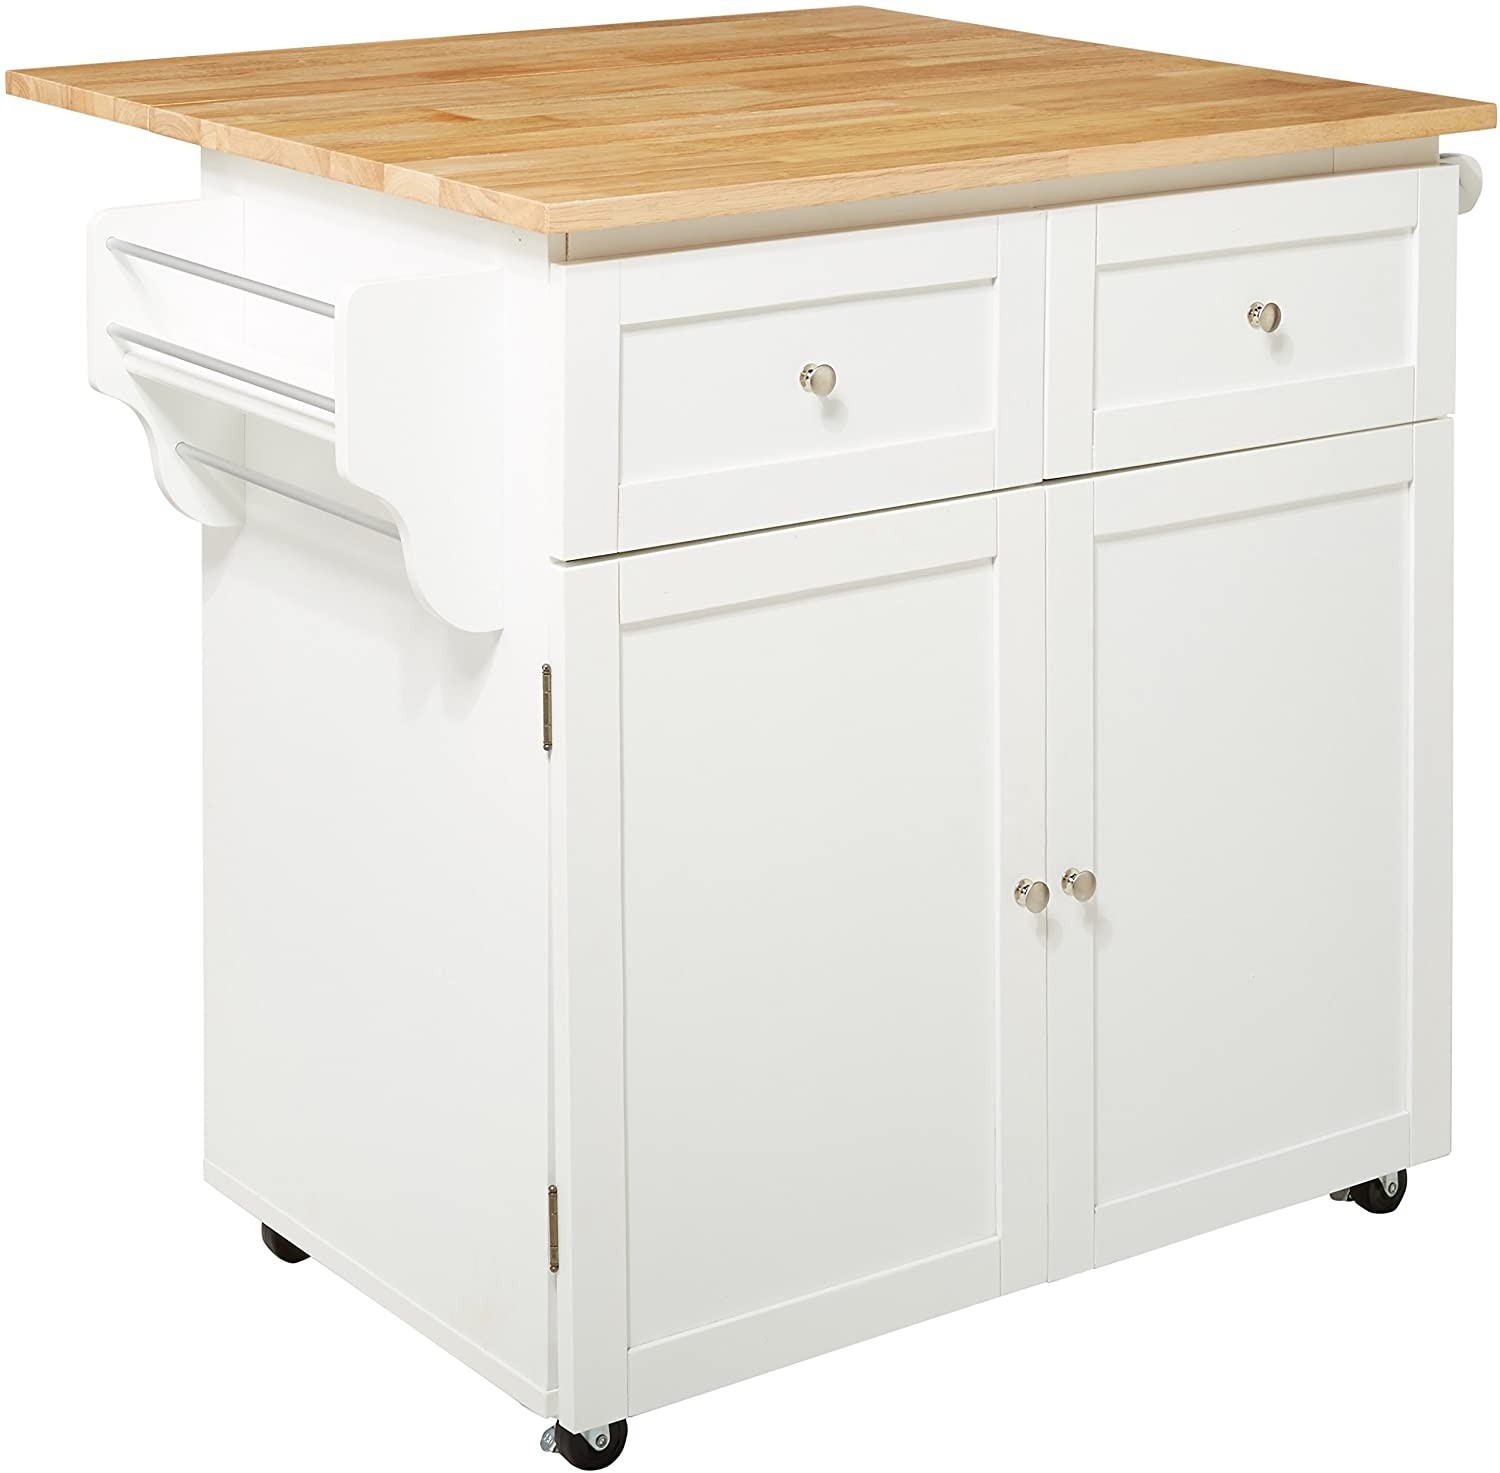 Best kitchen island with trash bin compartment tech review